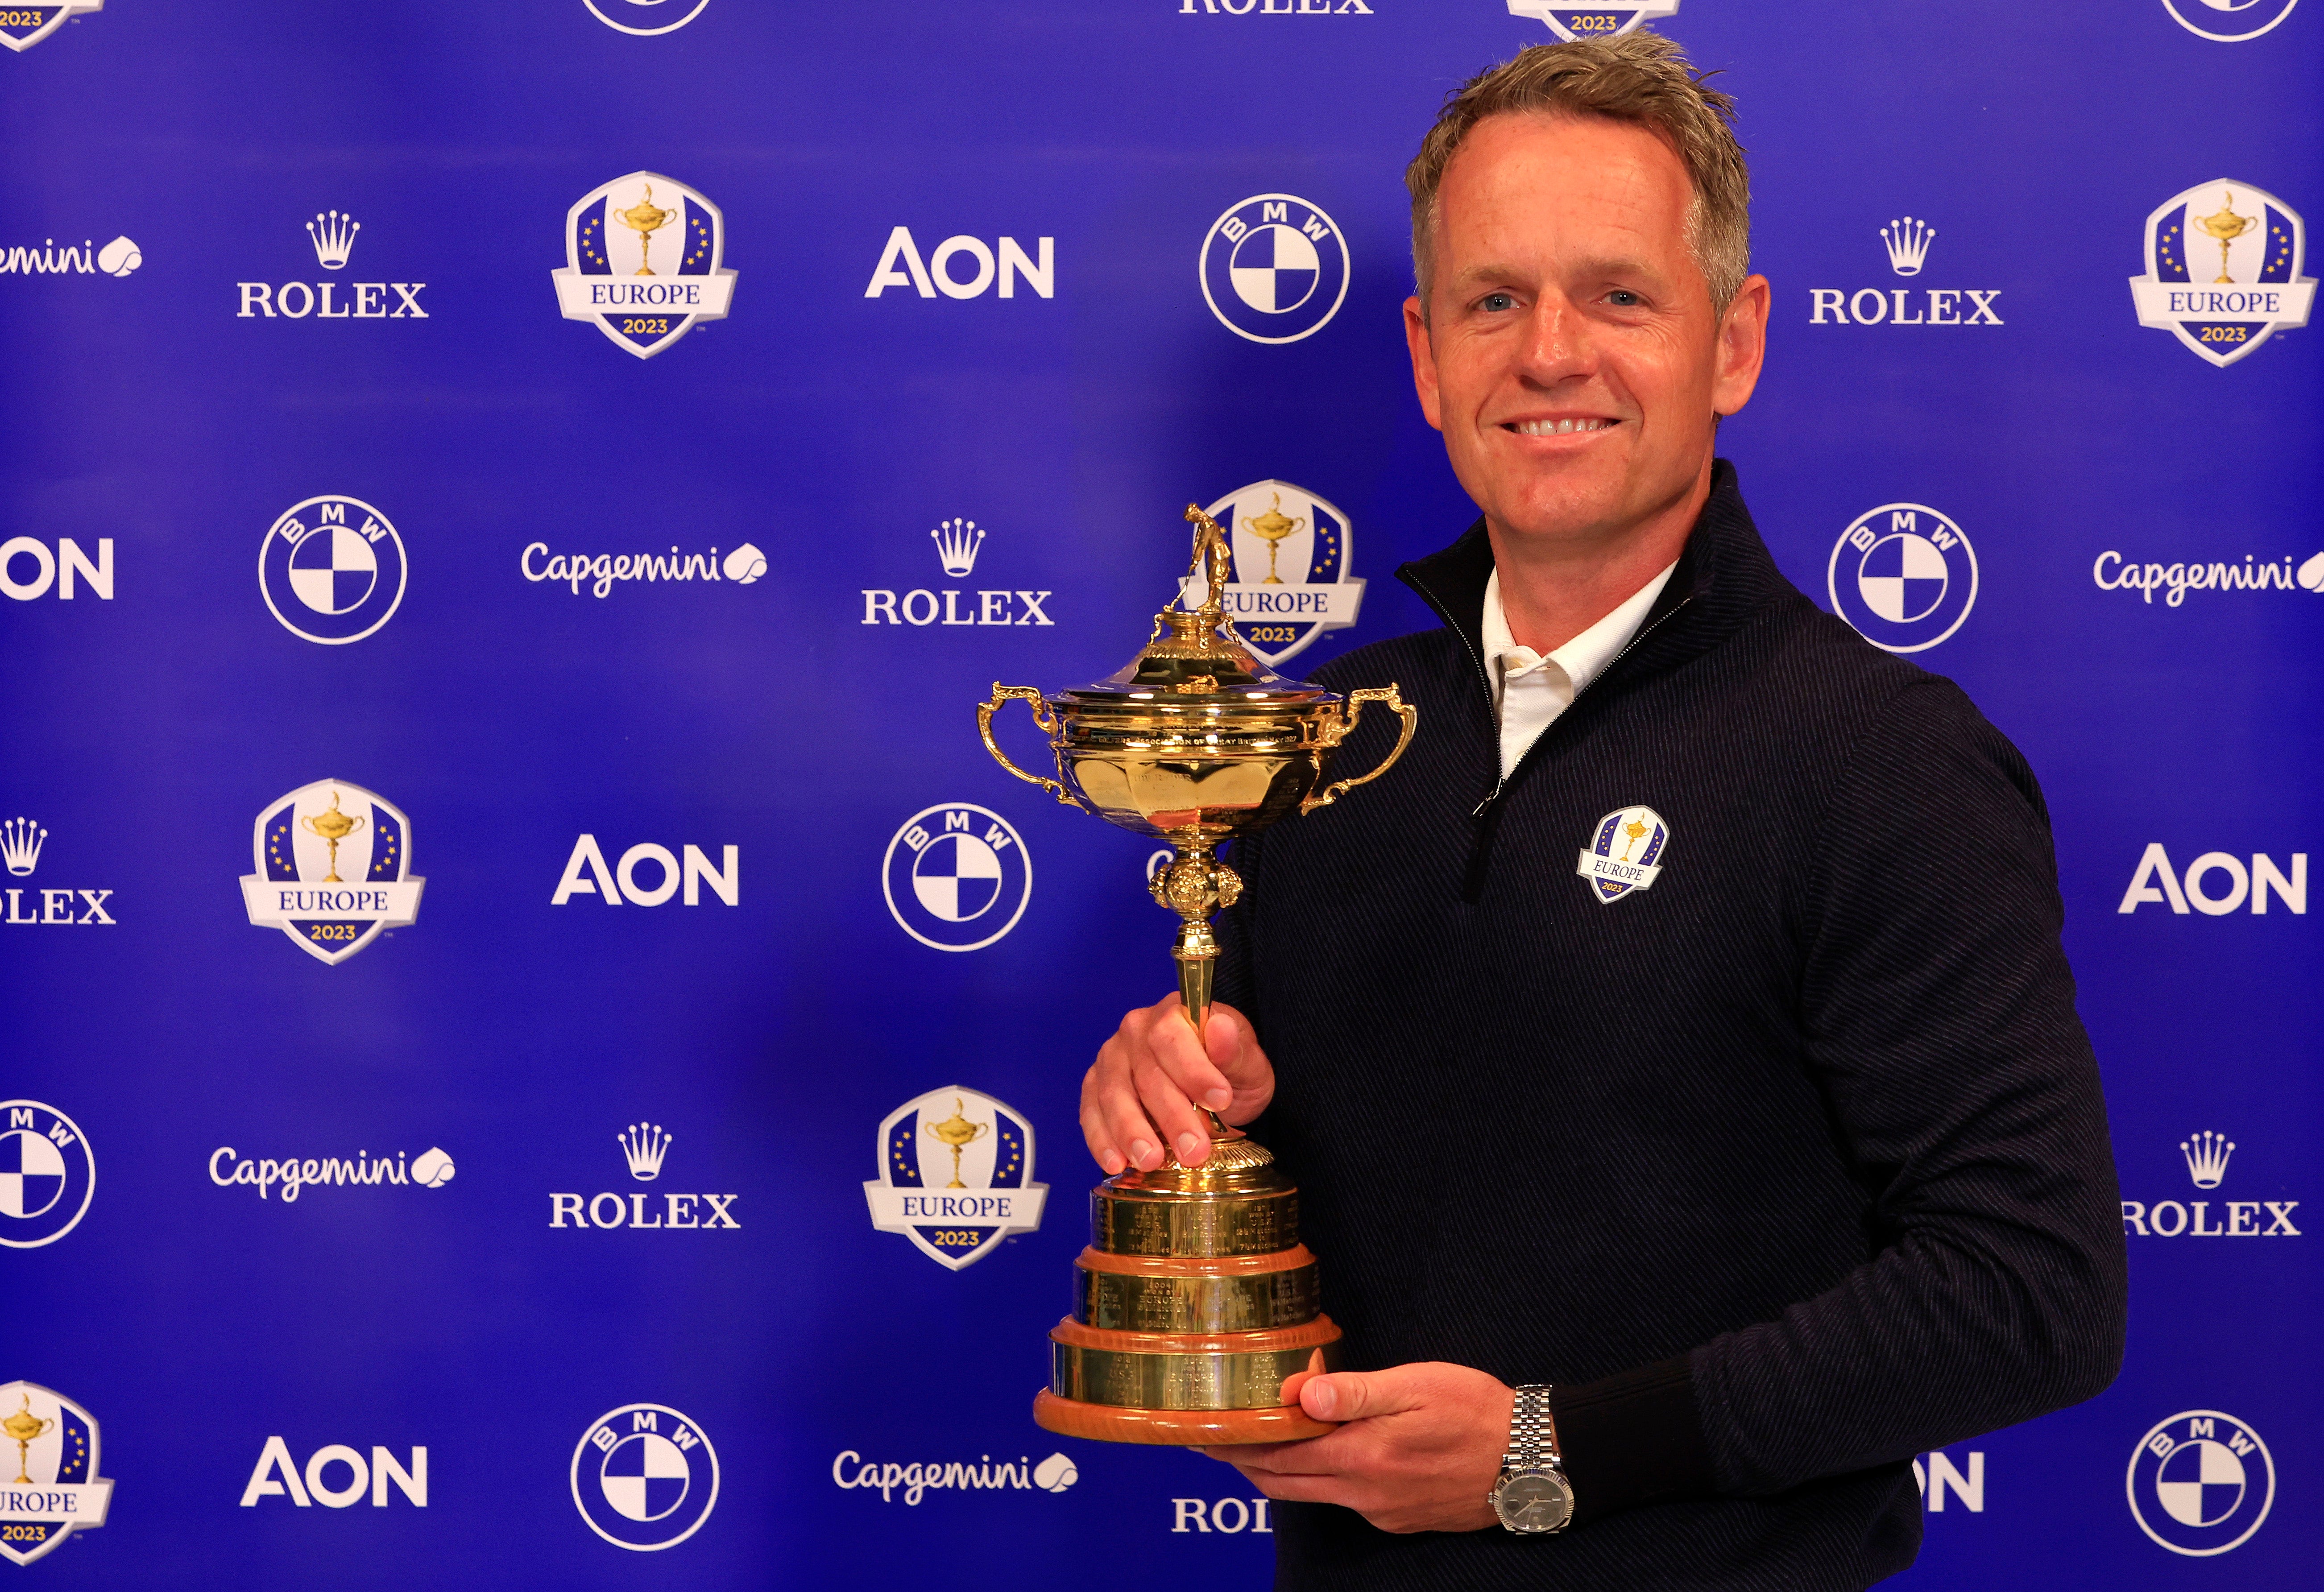 Luke Donald poses with the Ryder Cup after being announced as Europe’s new captain